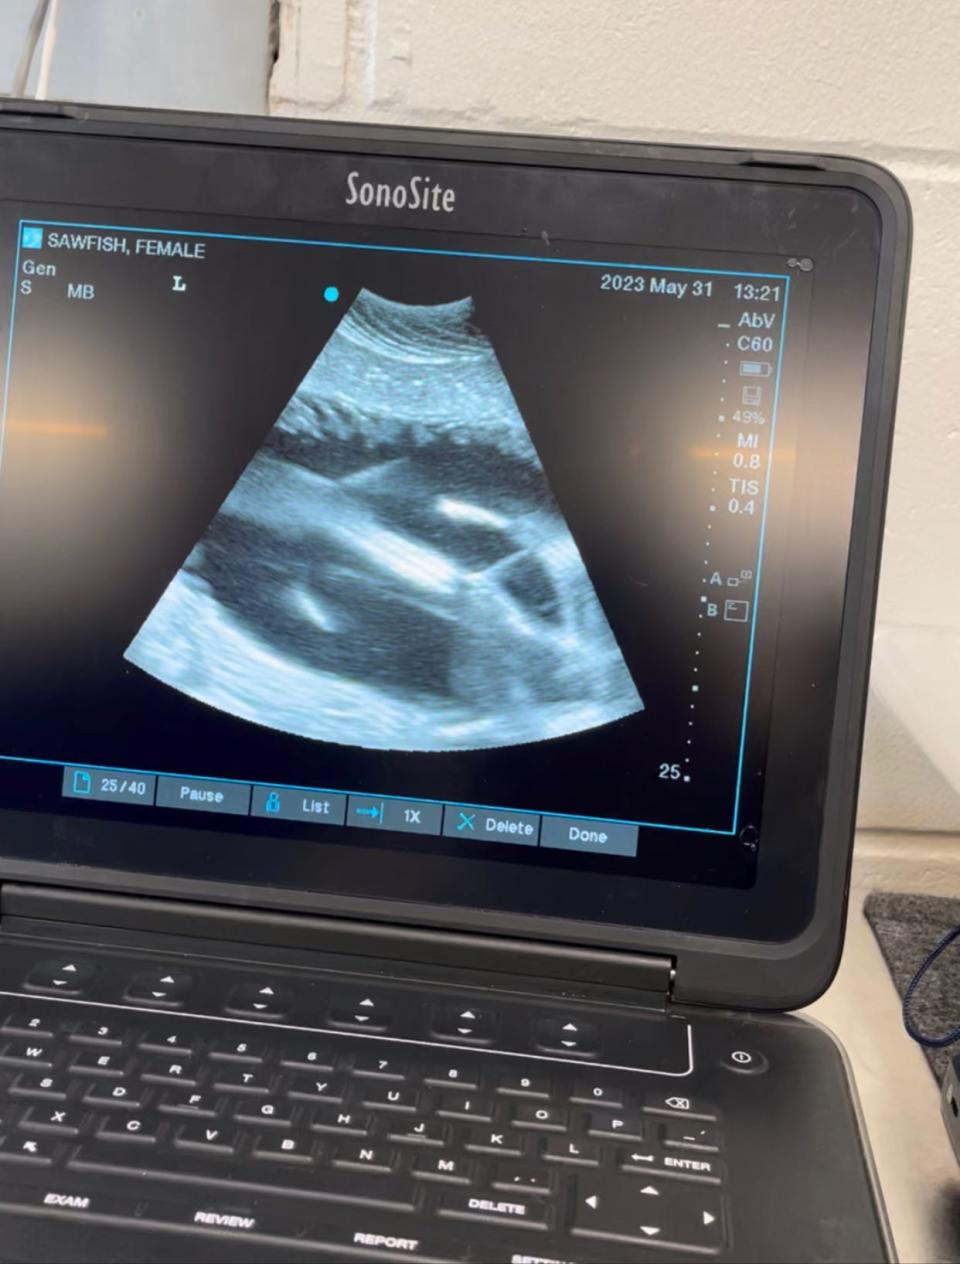 In late May, SeaWorld Orlando's veterinary teams discovered through ultrasound that the female sawfish was pregnant.